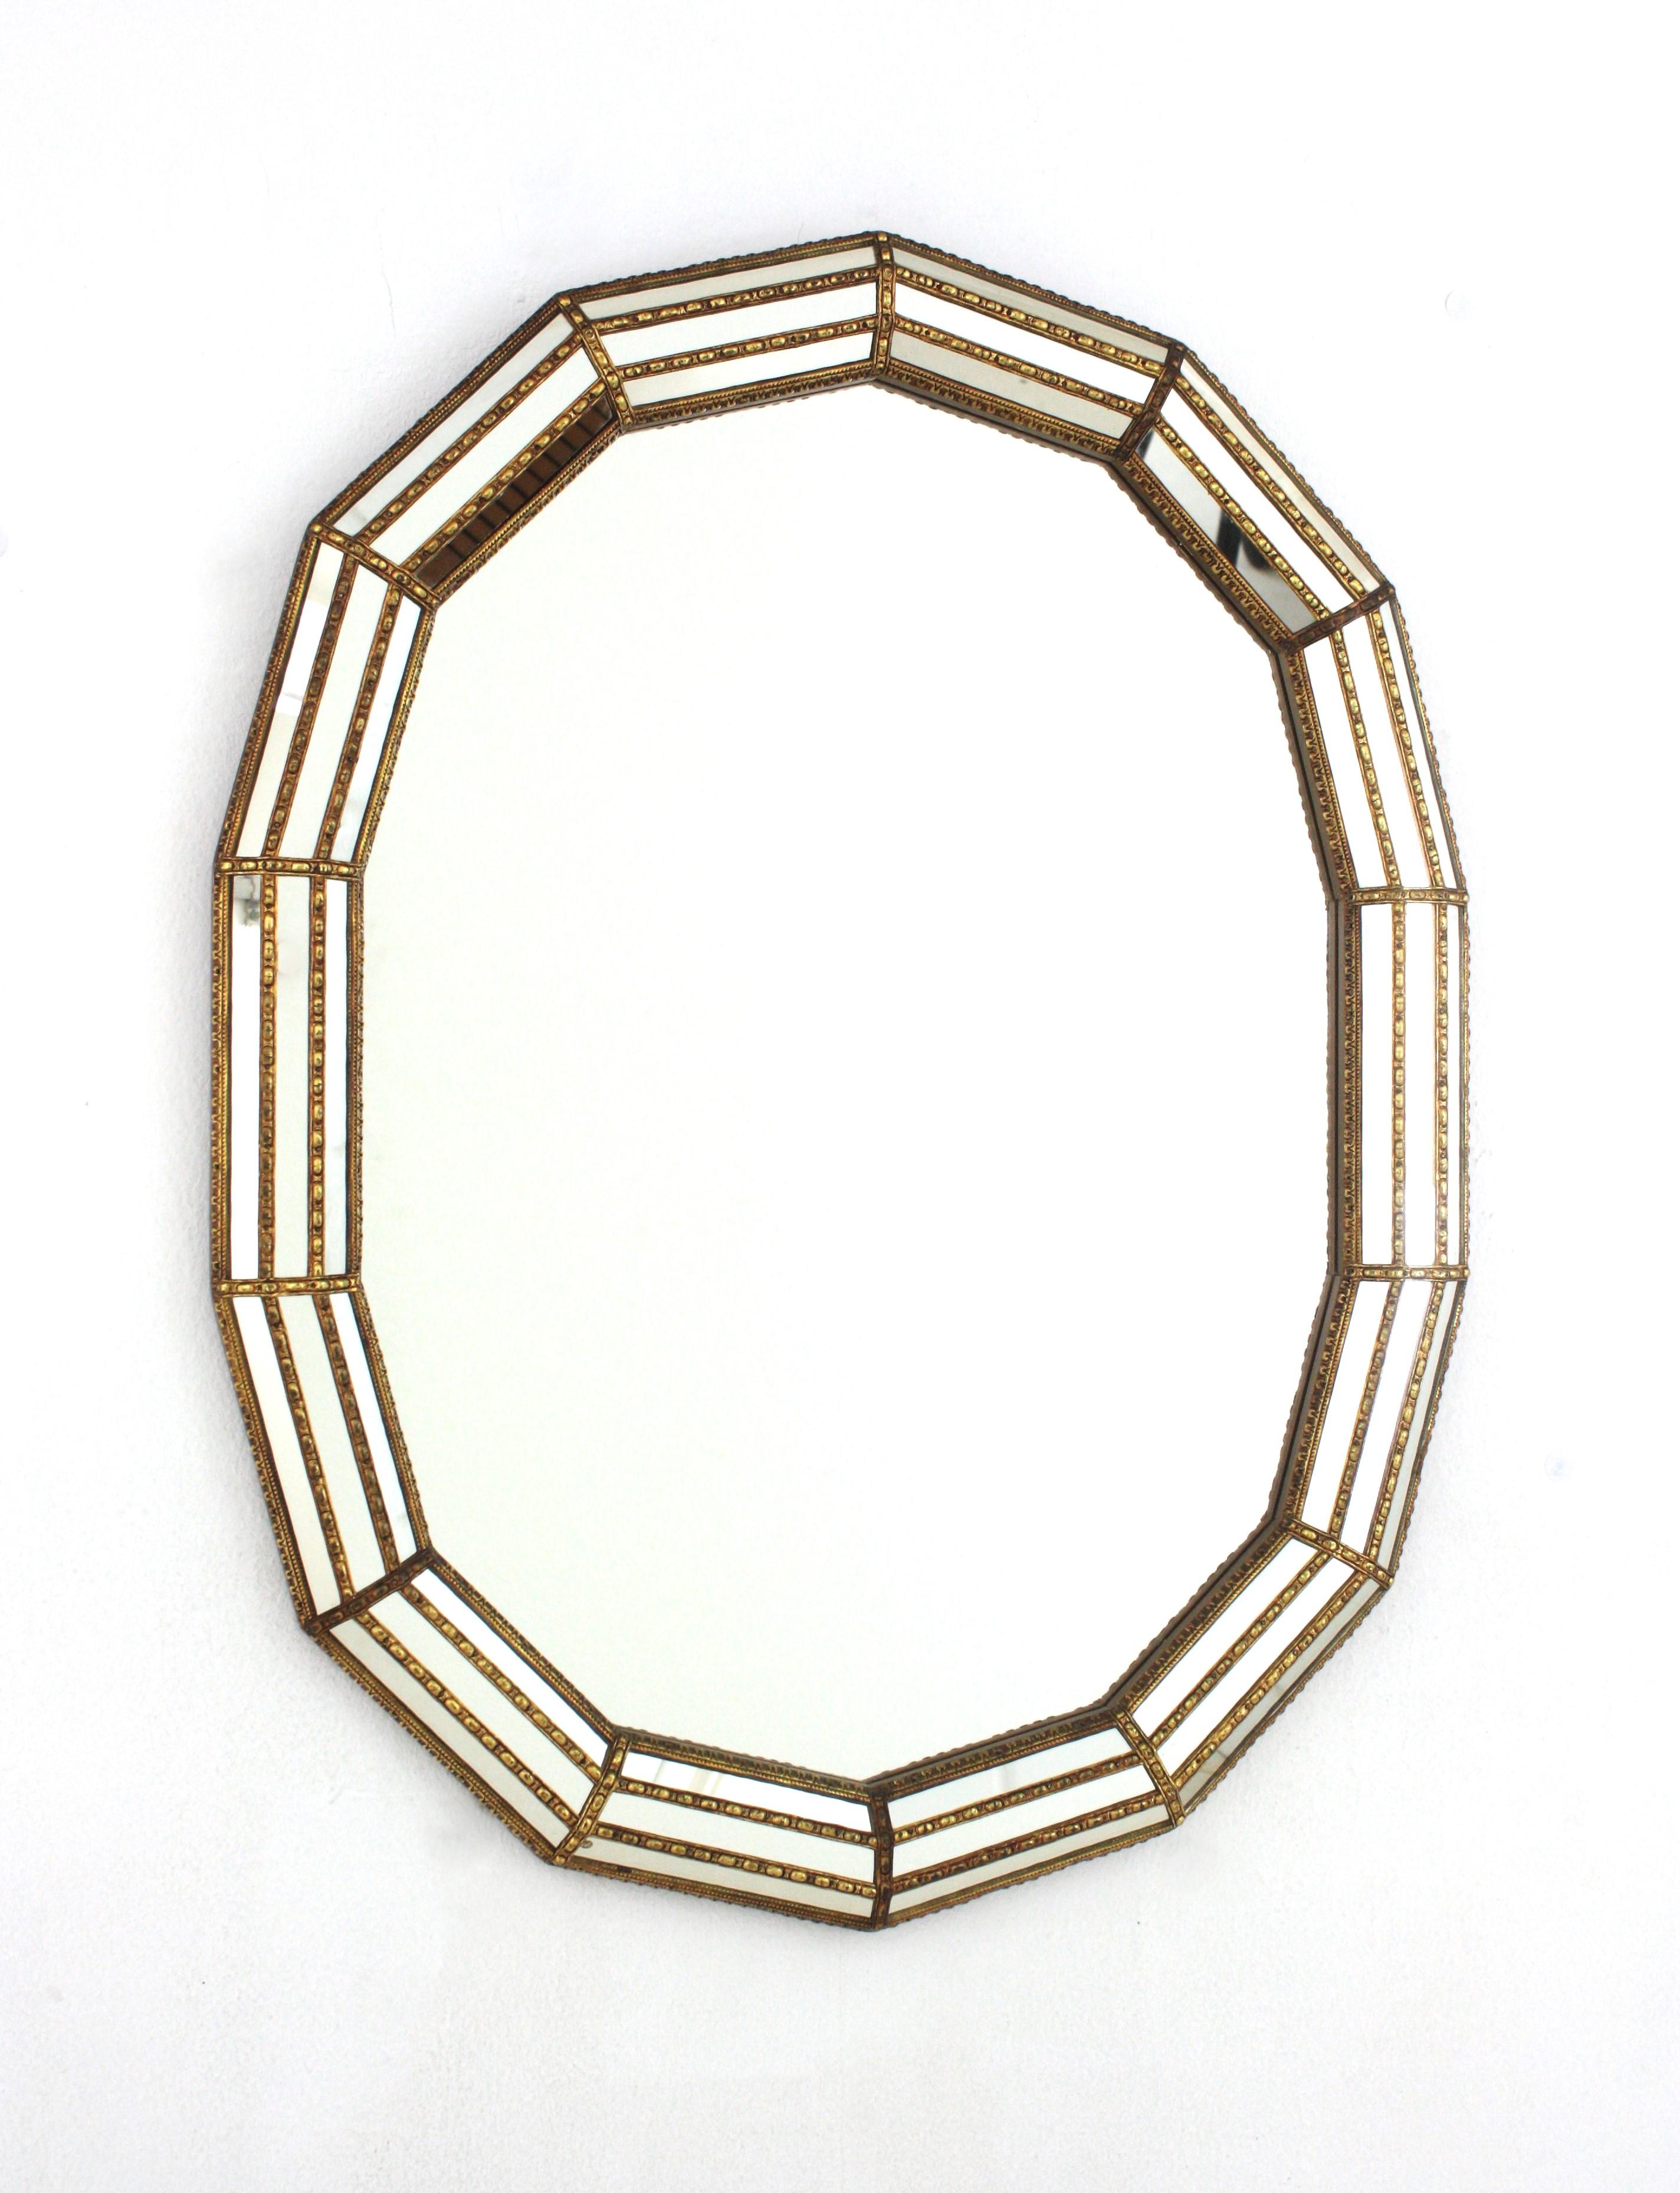 Venetian style Regency modern oval wall mirror with gilt metal accents, Spain, 1960s
Oval shaped mirror made of 14 sides. Triple mirror mosaic frame cased into a gilt wood structure. The mirrored panels are adorned by brass classical patterns.
This